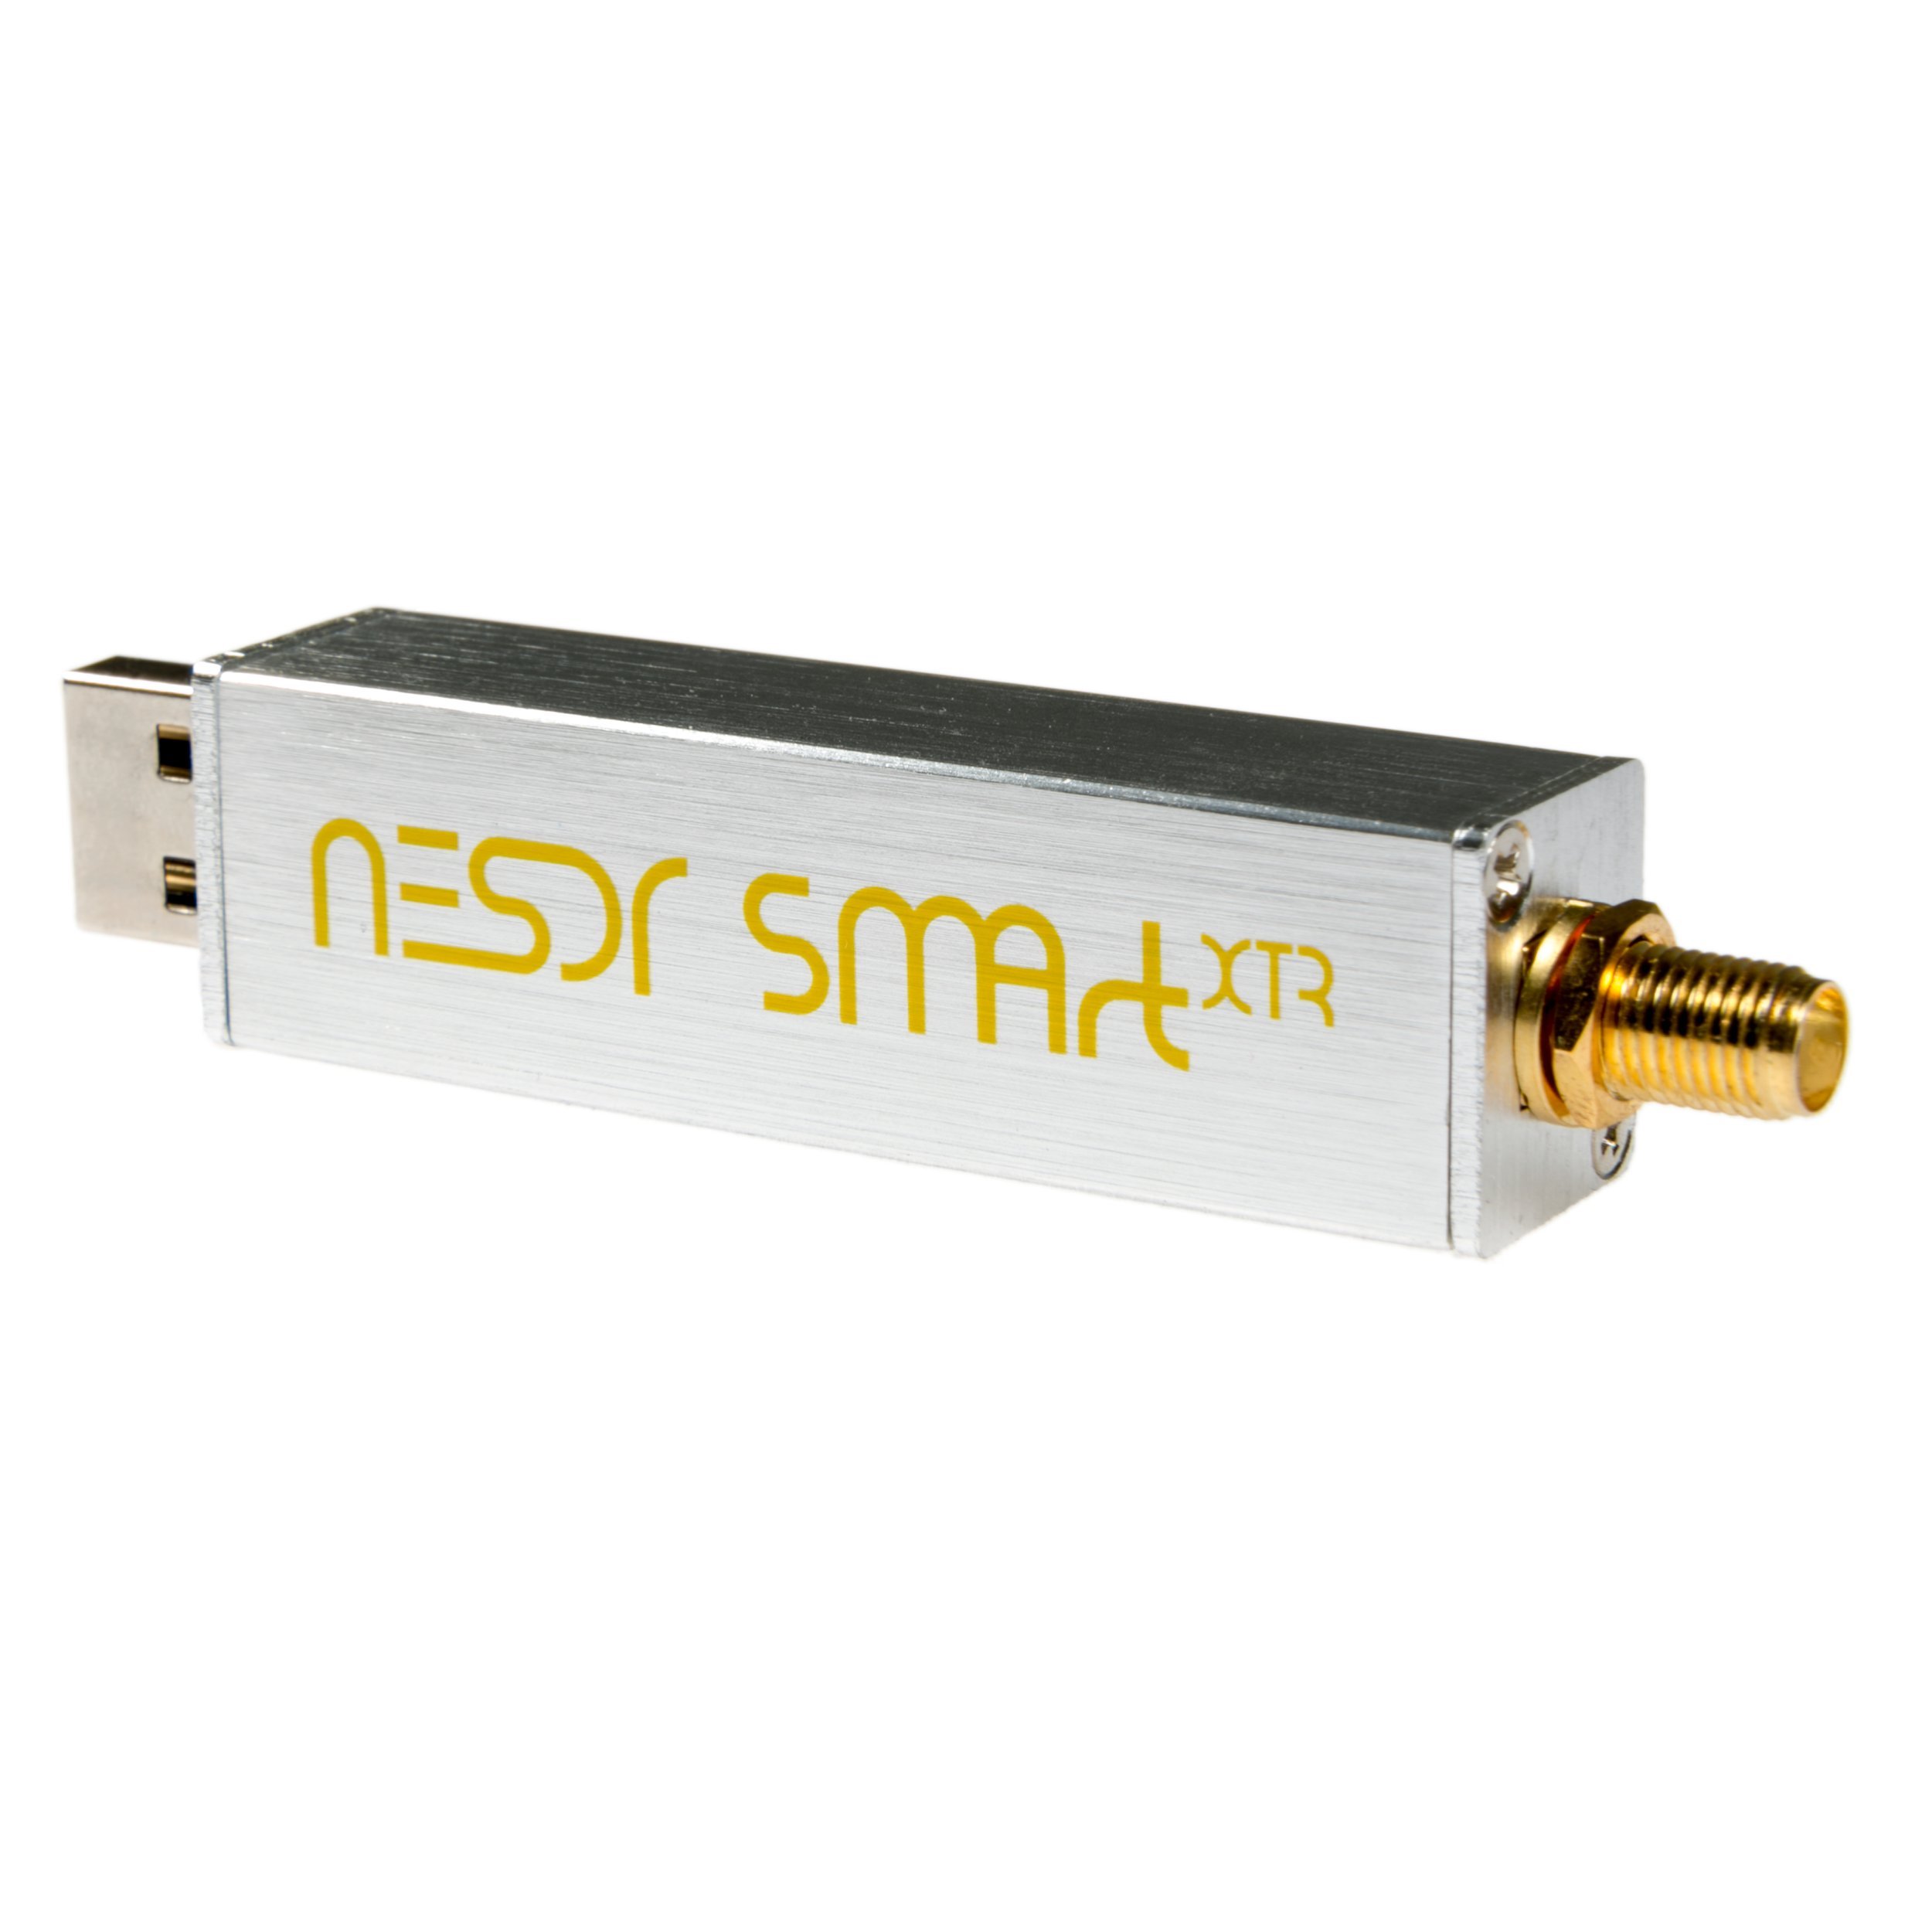 Mua Nooelec Nesdr Smart Xtr Sdr Premium Rtl Sdr Wextended Tuning